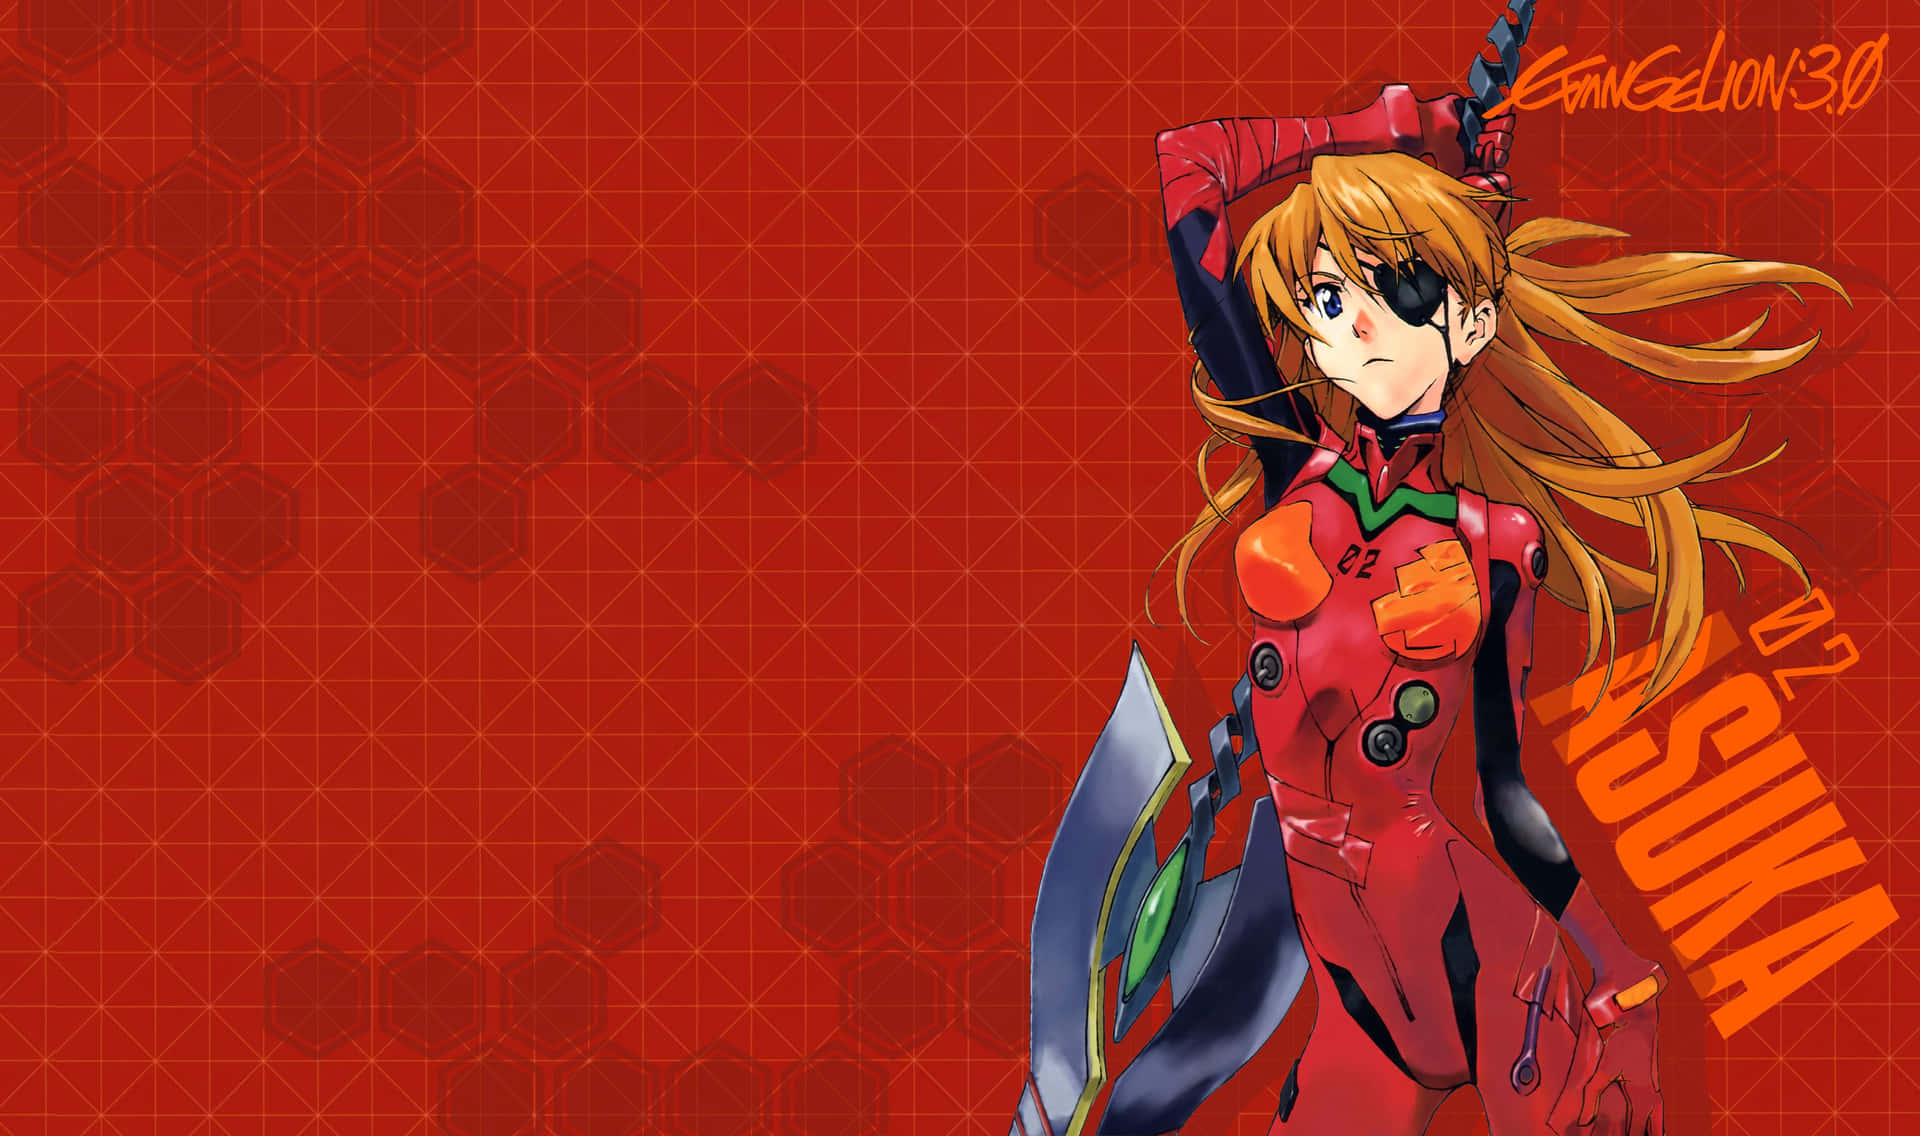 Asuka Langley Soryu glares intently wearing her plugsuit and headset in front of dazzling colors Wallpaper